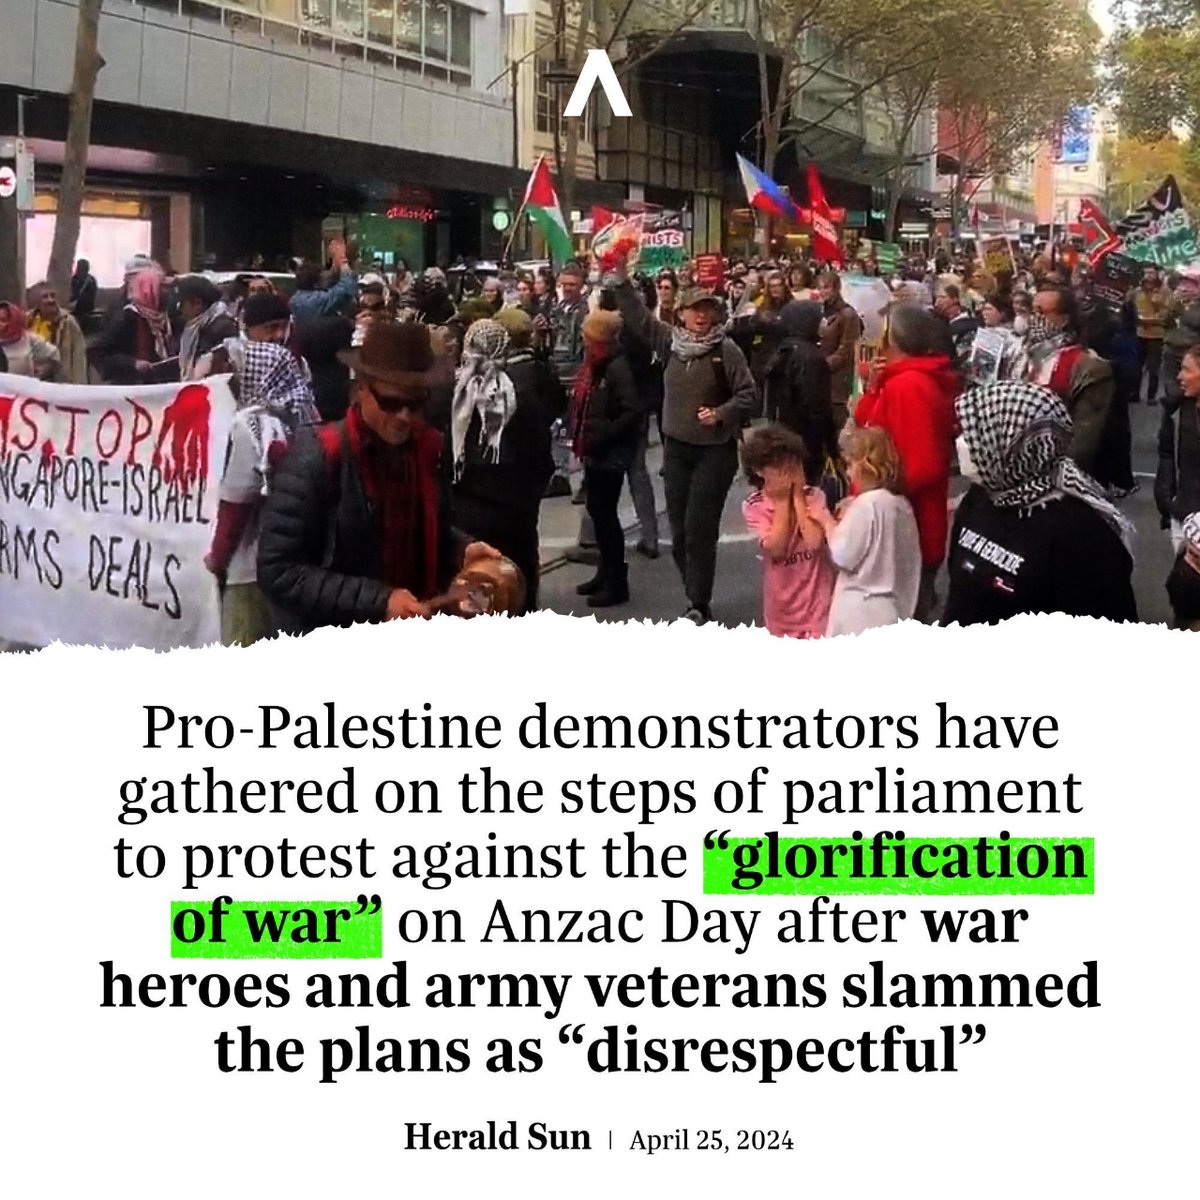 Anzac Day is now under attack from the activists and elites. Our most sacred national day is to them just another opportunity for protest and division. If you hate our country, why don't you go live in 'Palestine'?